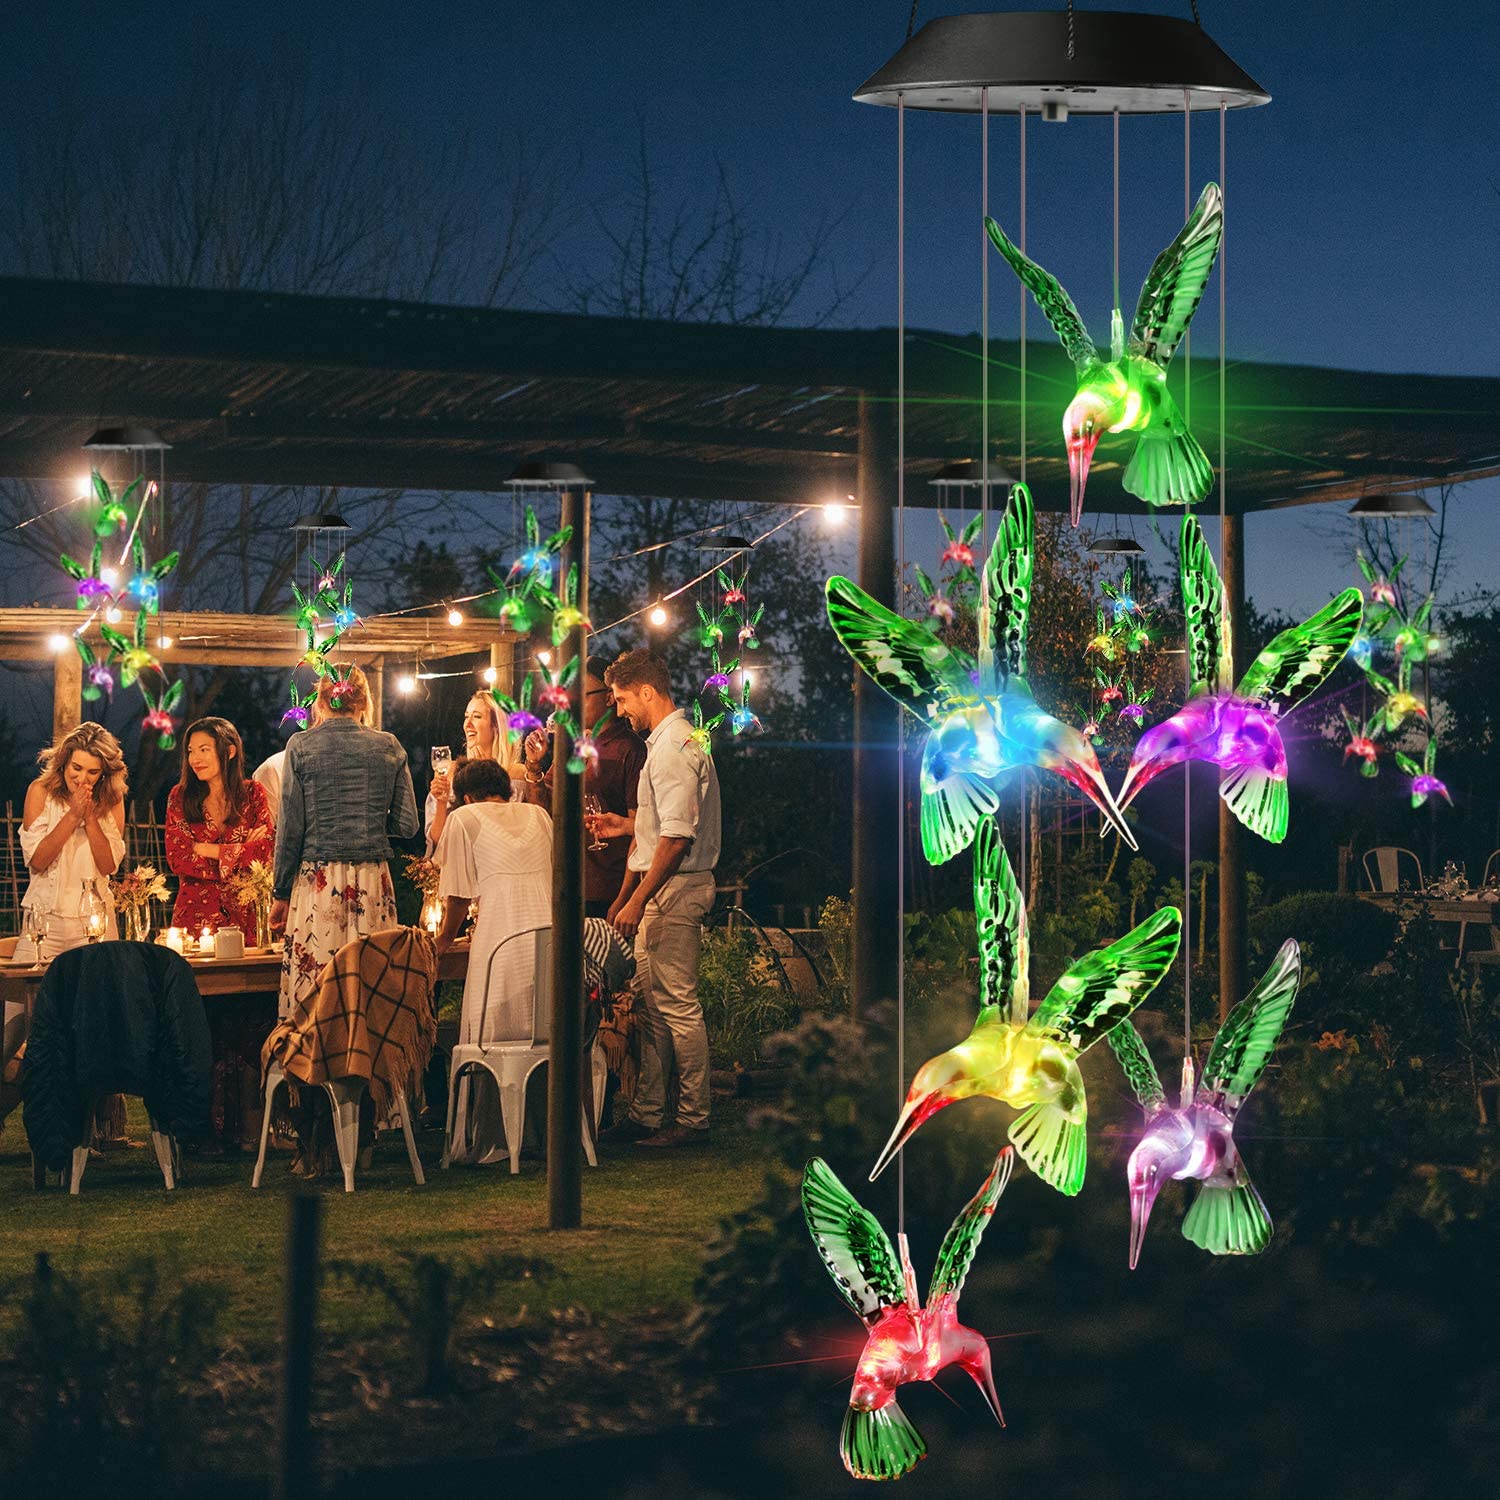 LED Solar Hummingbird Wind Chime, Changing Color Waterproof Six Hummingbird  Wind Chimes for Home Party Night Garden Decoration (Hummingbird) 